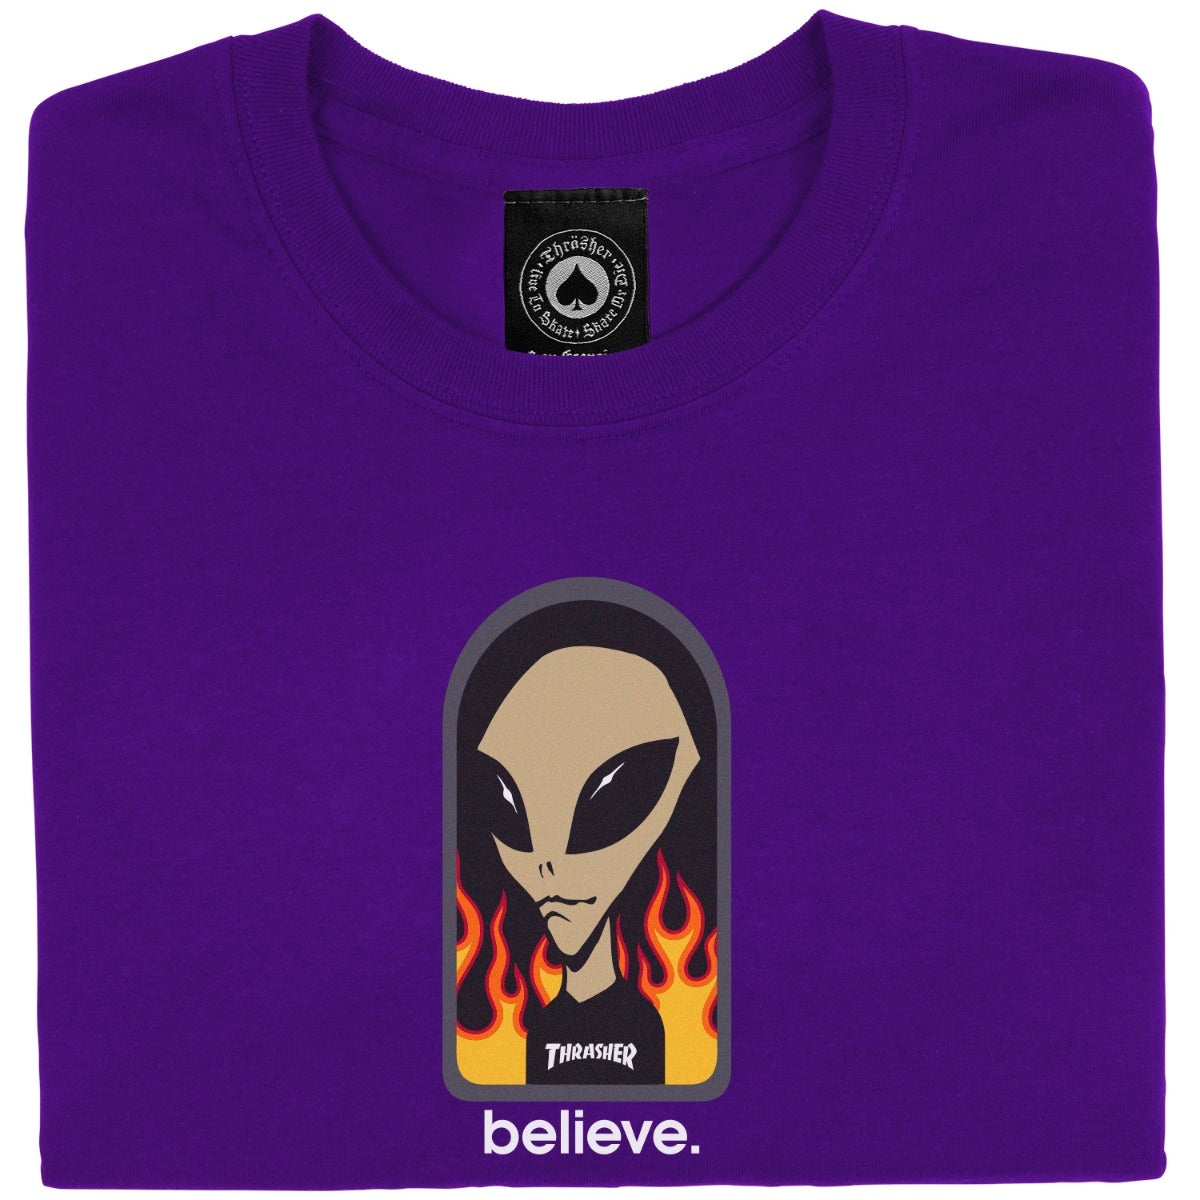 Thrasher X AWS Believe S/S tee Shirt Purp(size options listed)